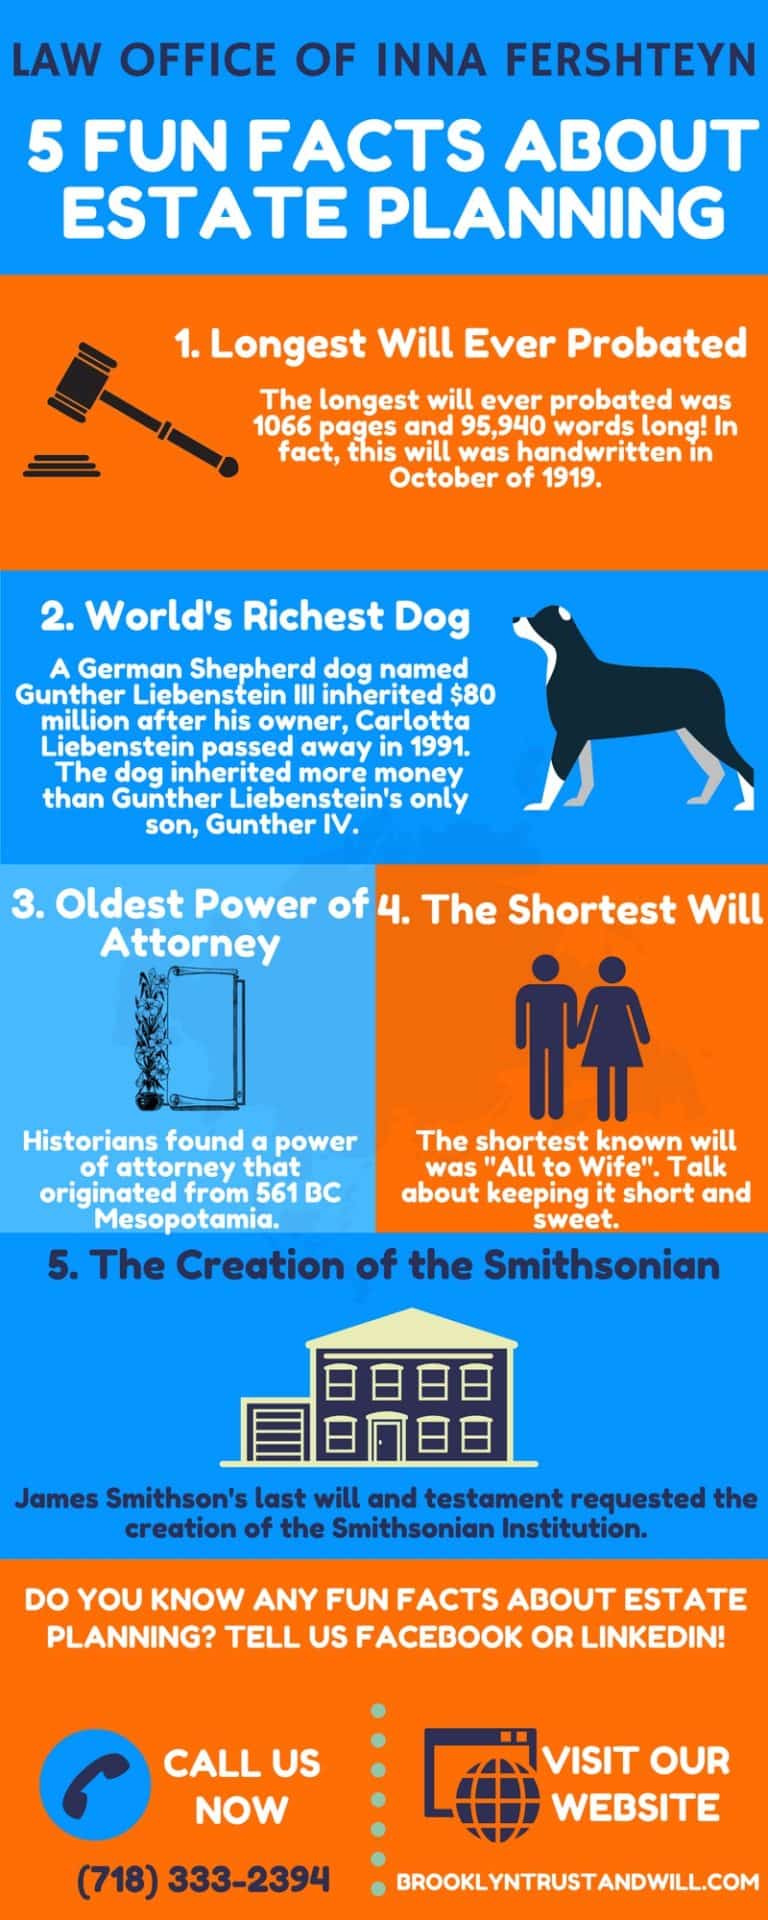 5 Fun Facts About Estate Planning (Infographic)